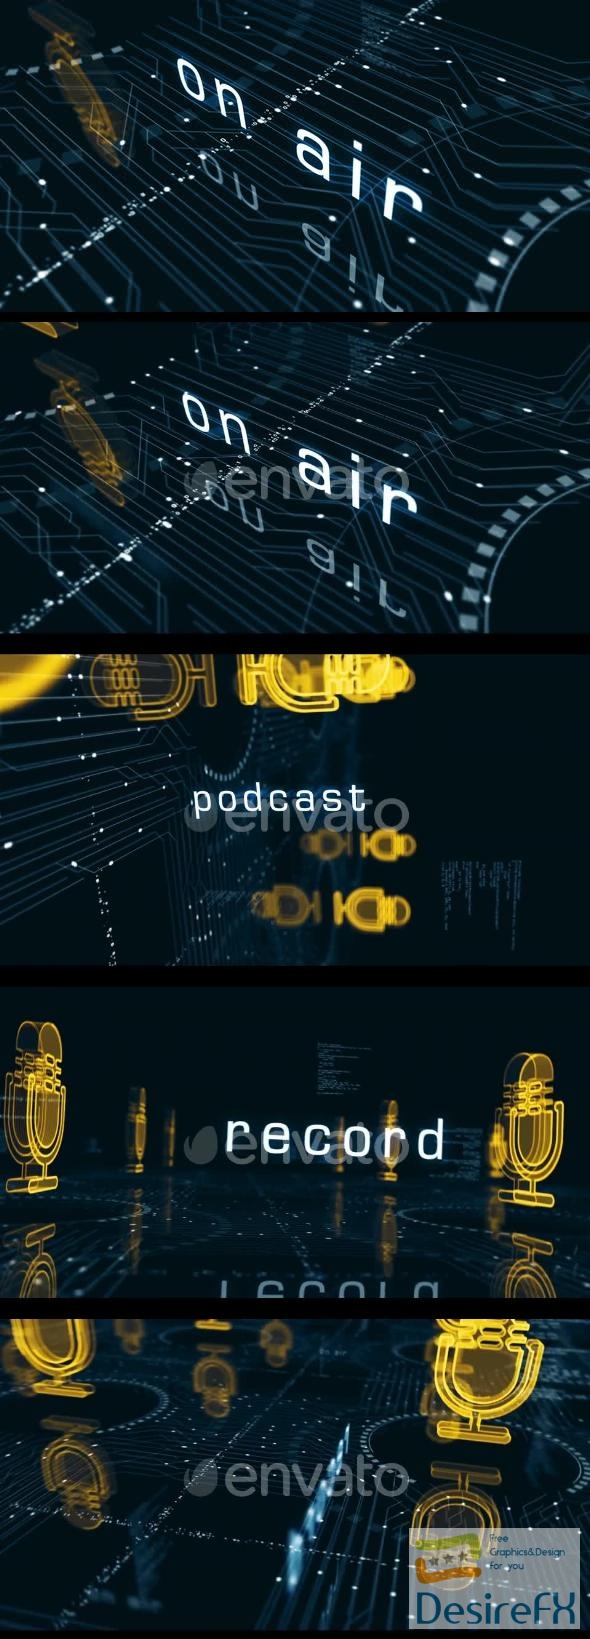 VideoHive Microphone online podcast and on air live record symbols loop cyber concept 47552750